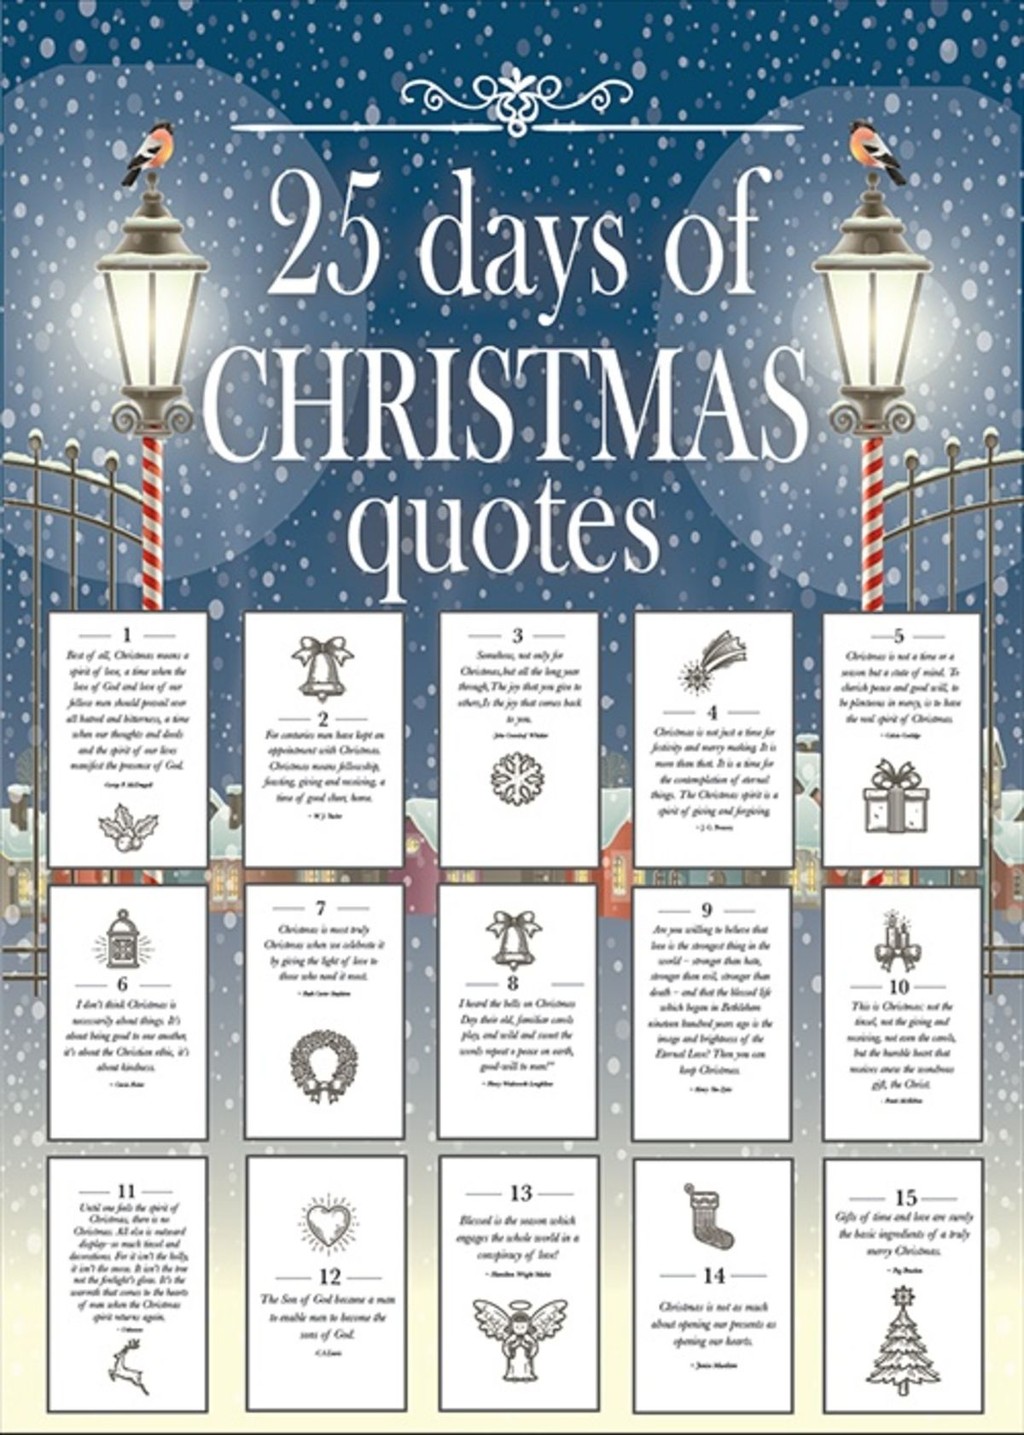 25 Days of Christmas Quotes